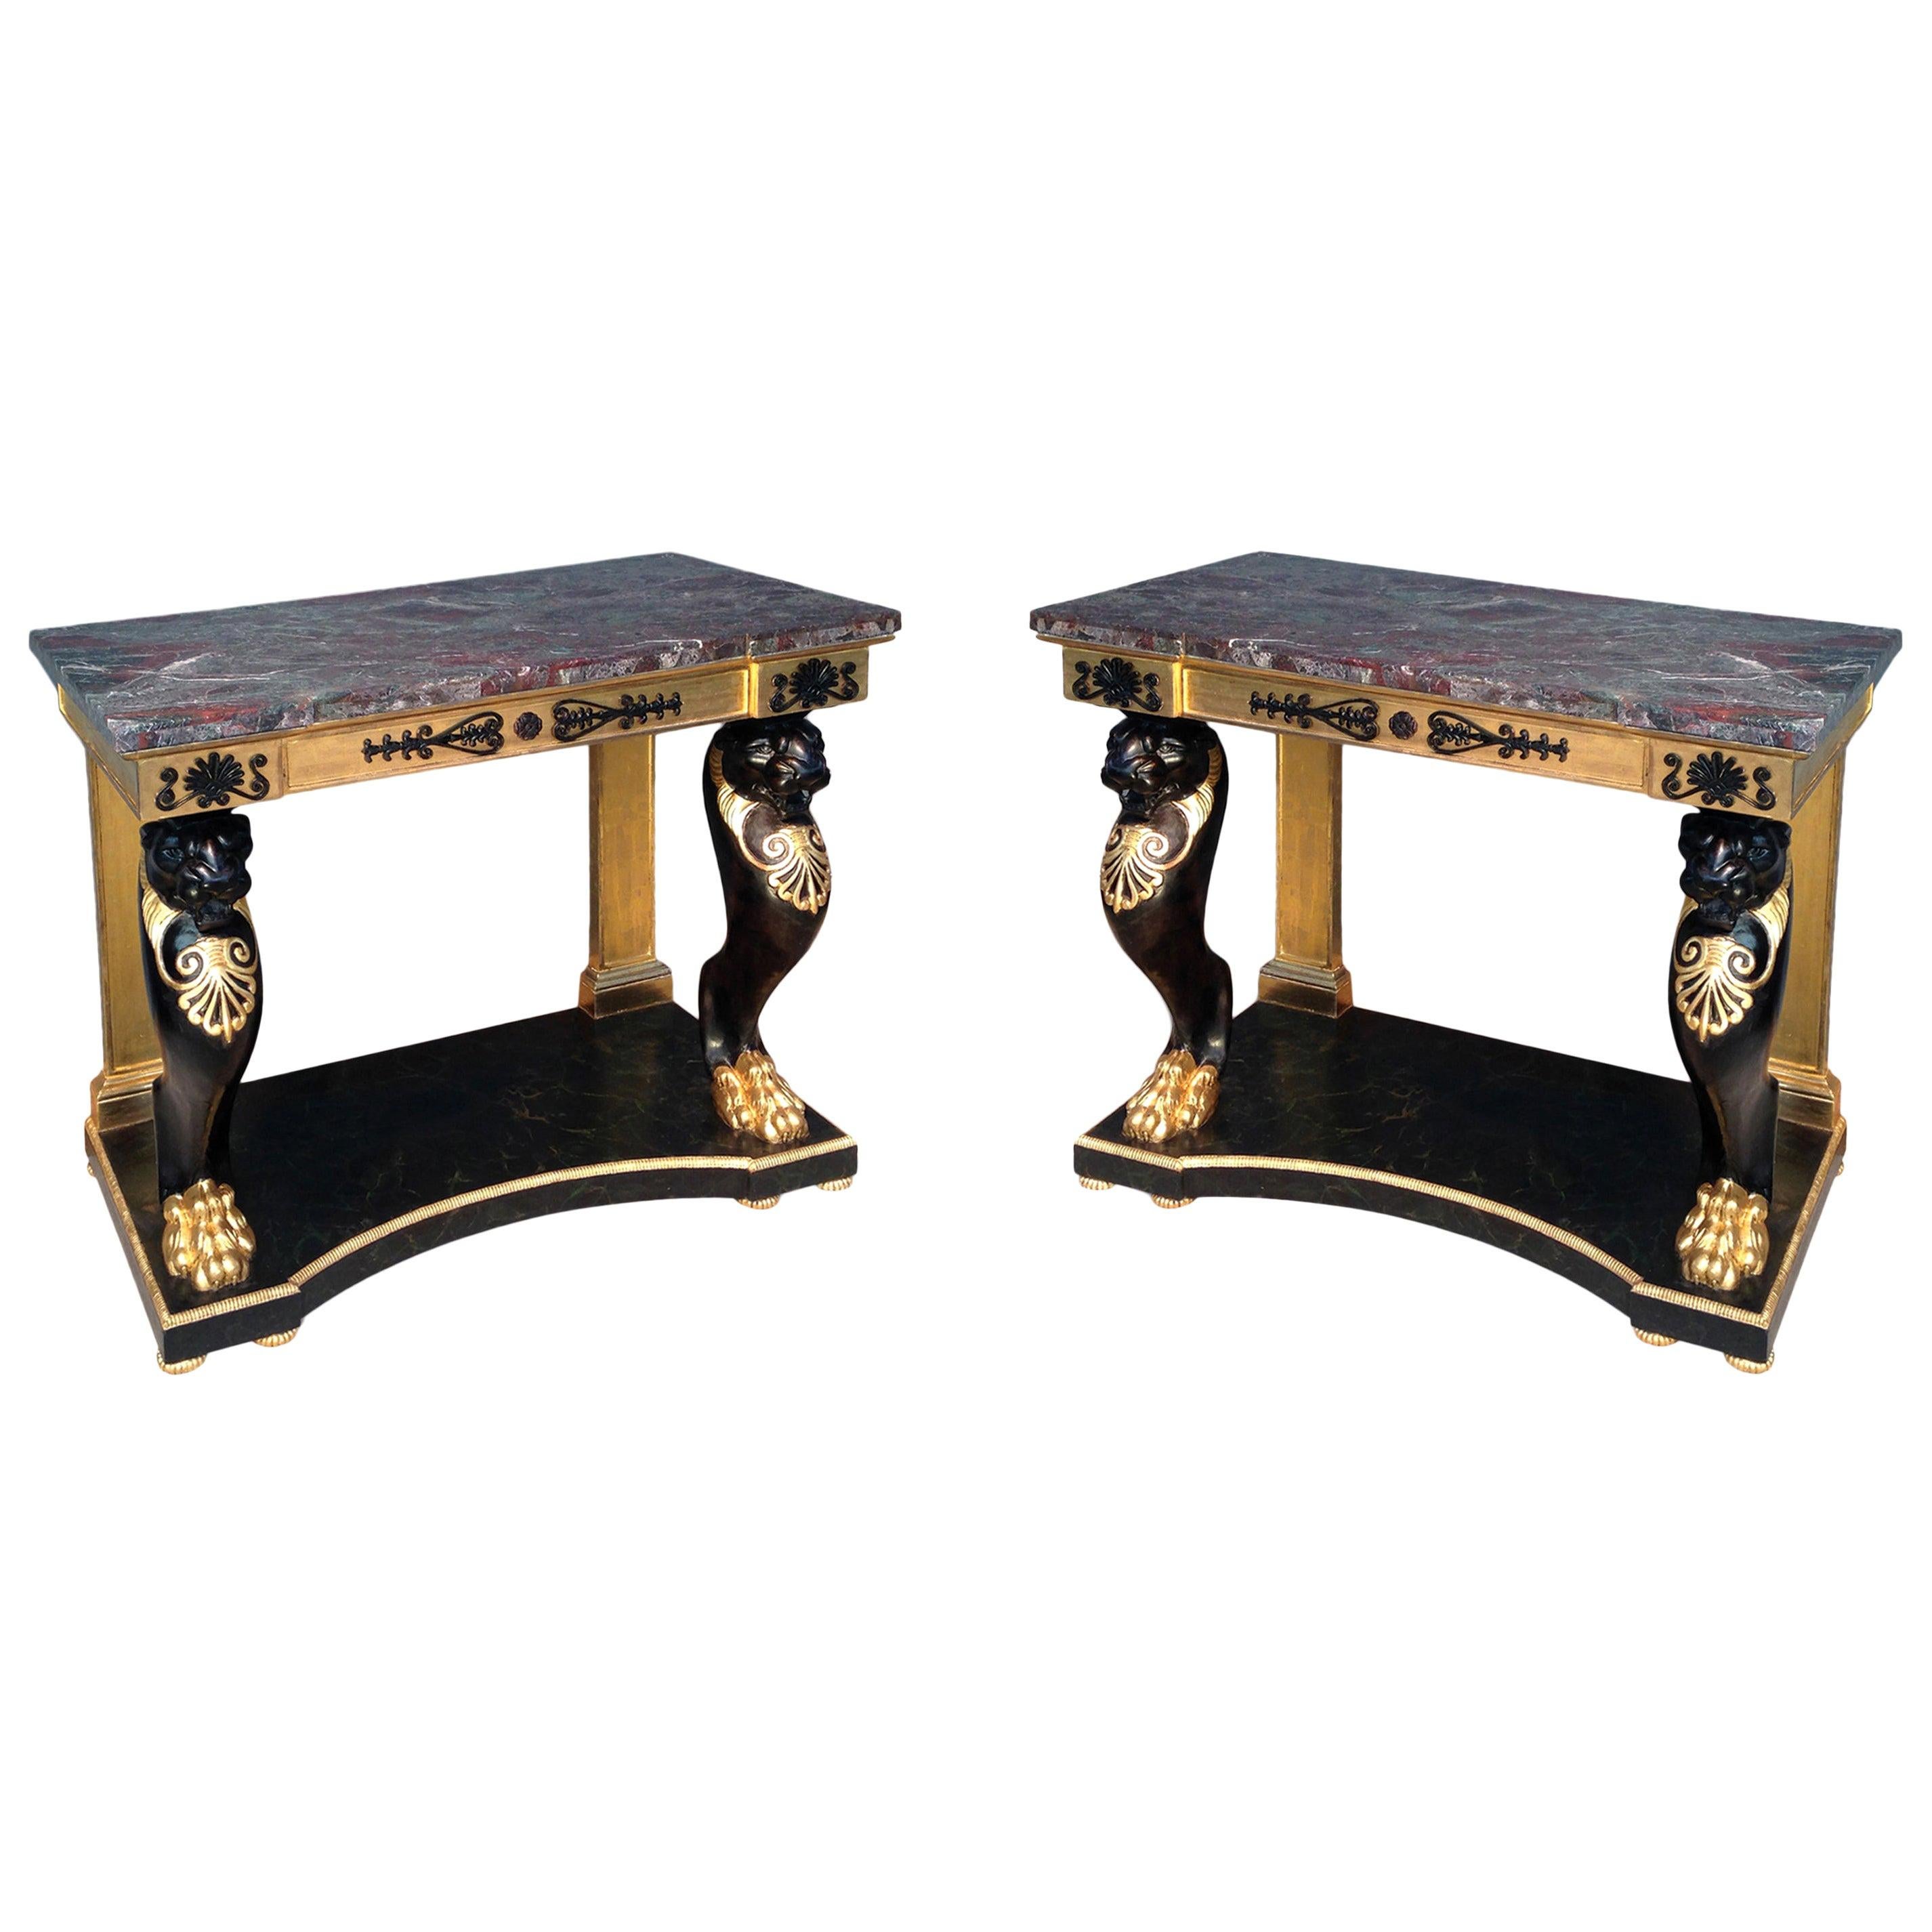 Pair of 19th Century Regency Gilt and Ebonized Console Tables